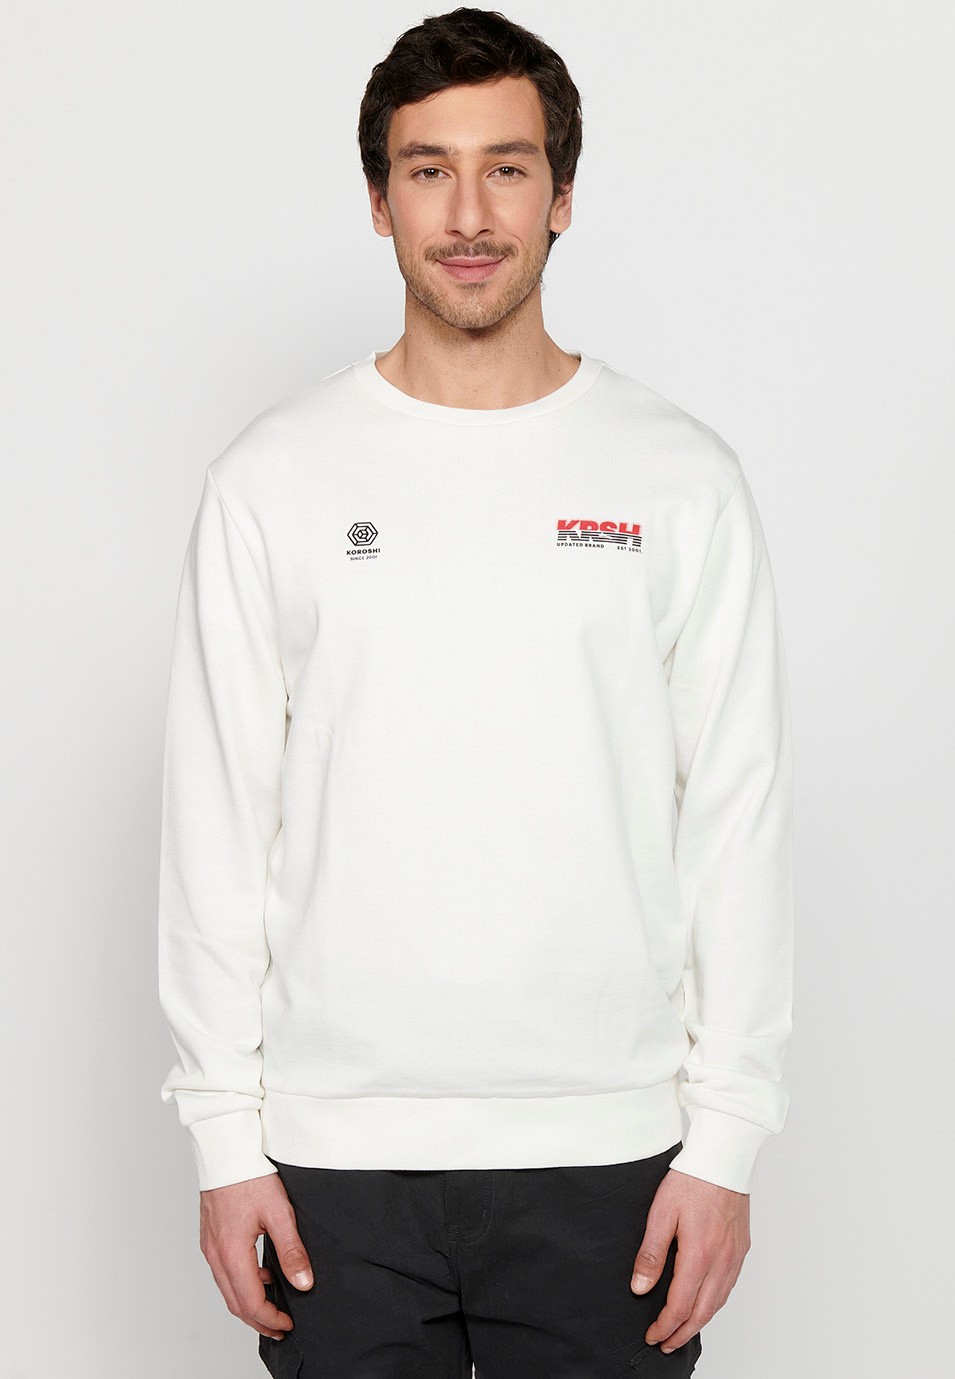 Long-sleeved sweatshirt with round neck and back detail in White for Men 3